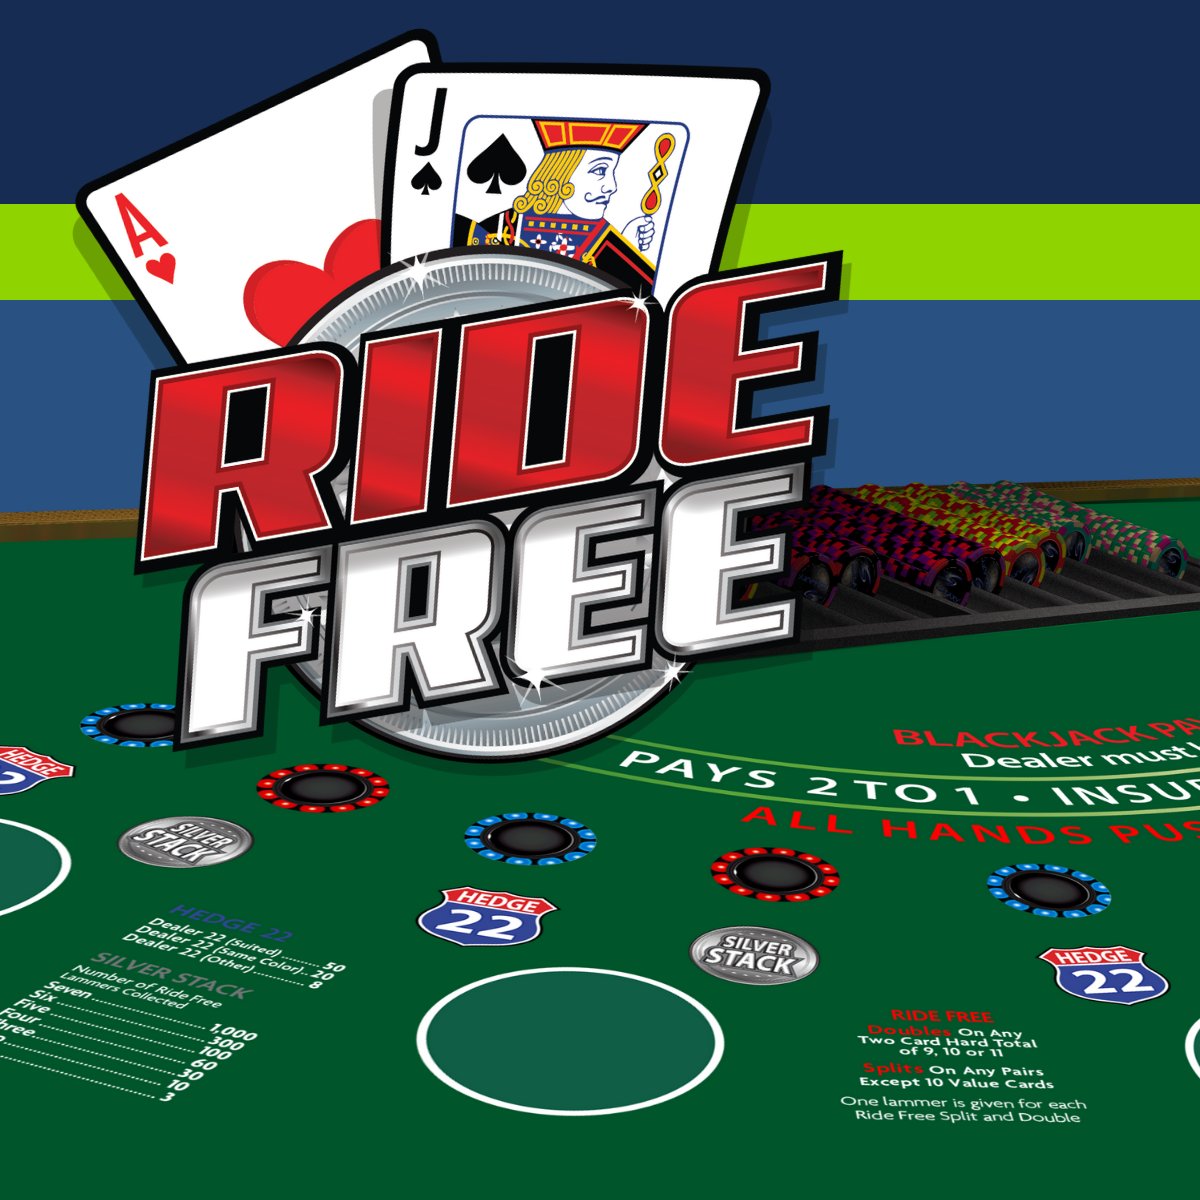 Split and Double Down and certain hands for FREE!

Get players excited about Blackjack with Galaxy&#39;s Ride Free -&gt; Contact your Sales Rep to schedule a demo!